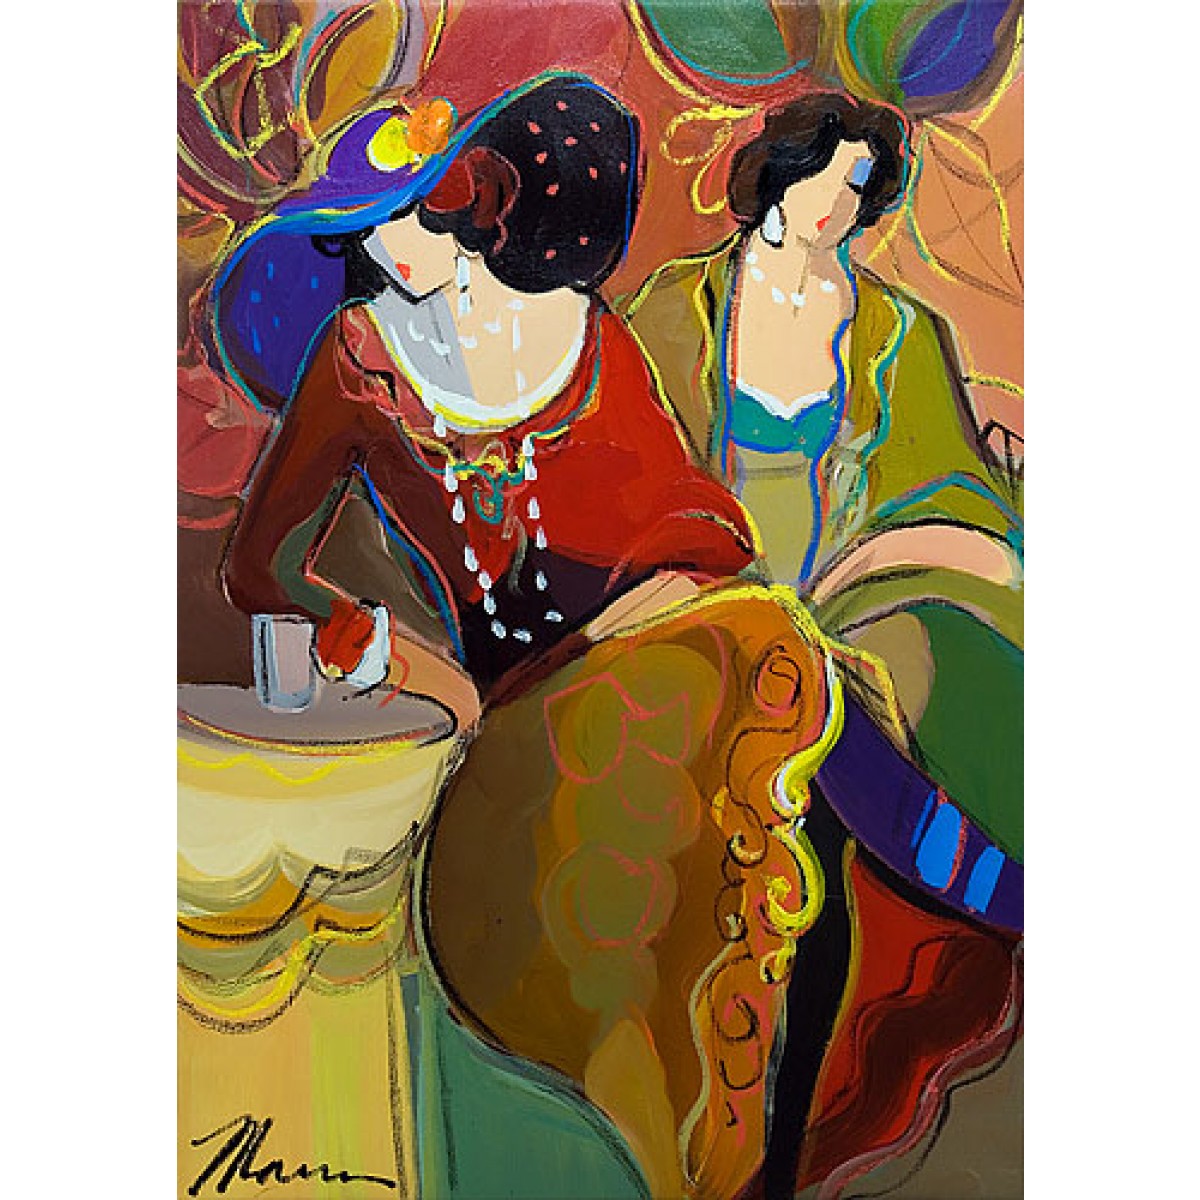 Two Women with Large Hats by Isaac Maimon